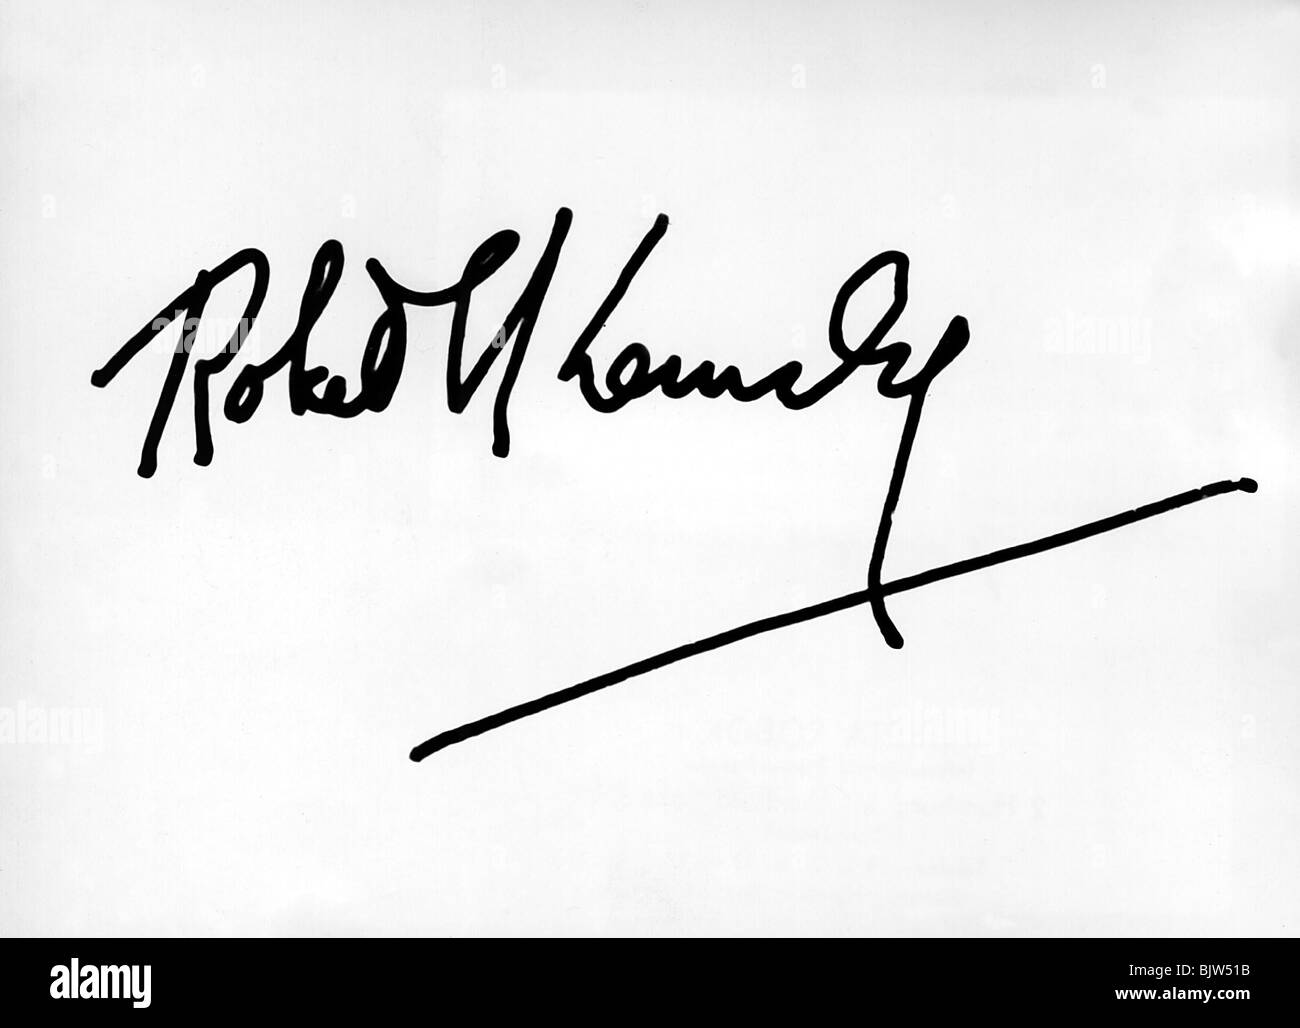 Kennedy, Robert Francis, 20.11.1925 - 6.6.1968, American politician, jurist, his signature, photography from 1965, Stock Photo